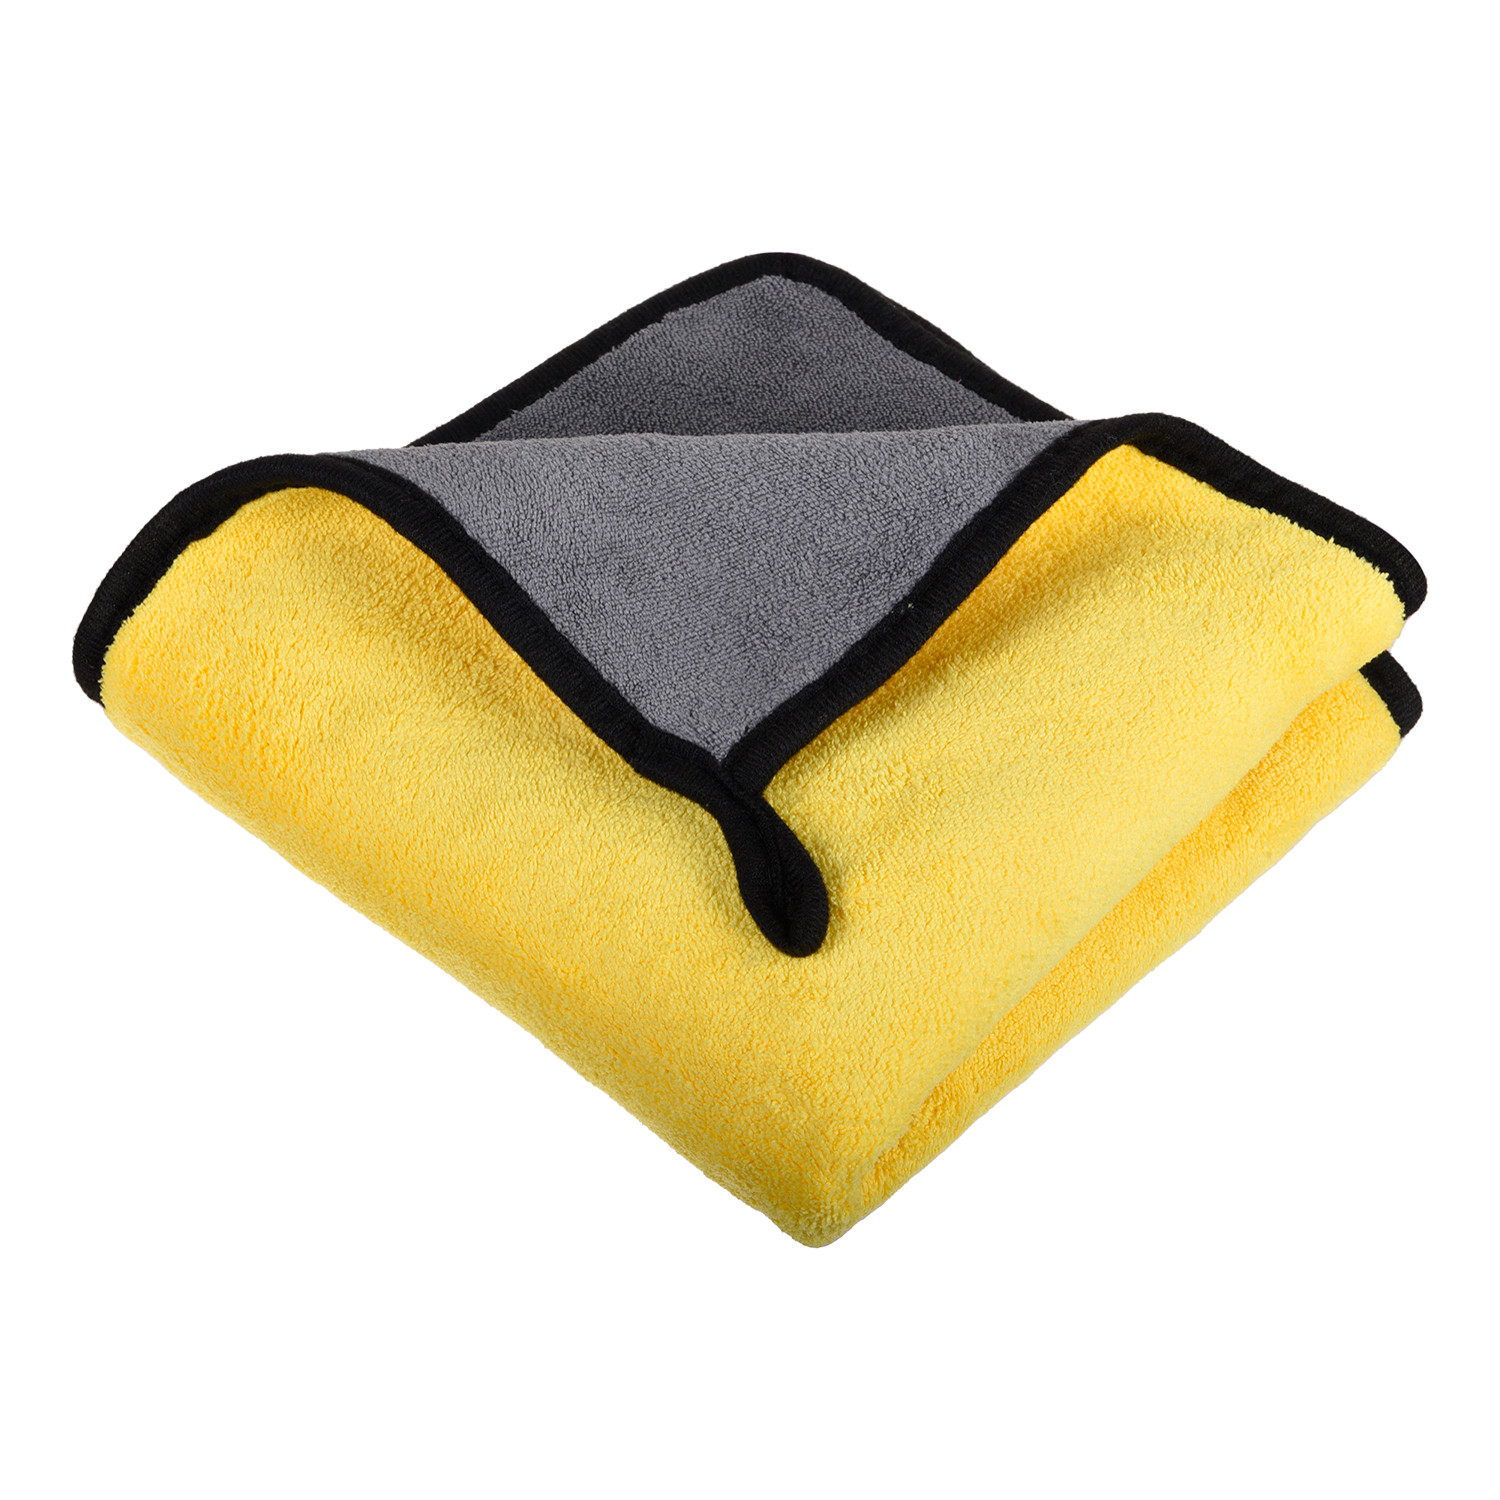 Kuber Industries Cleaning Towel|Microfiber Reusable Cloths|Highly Absorbent Washable Towel for Kitchen With Hanging Loop|Car|Window|40x40 Cm|Yellow